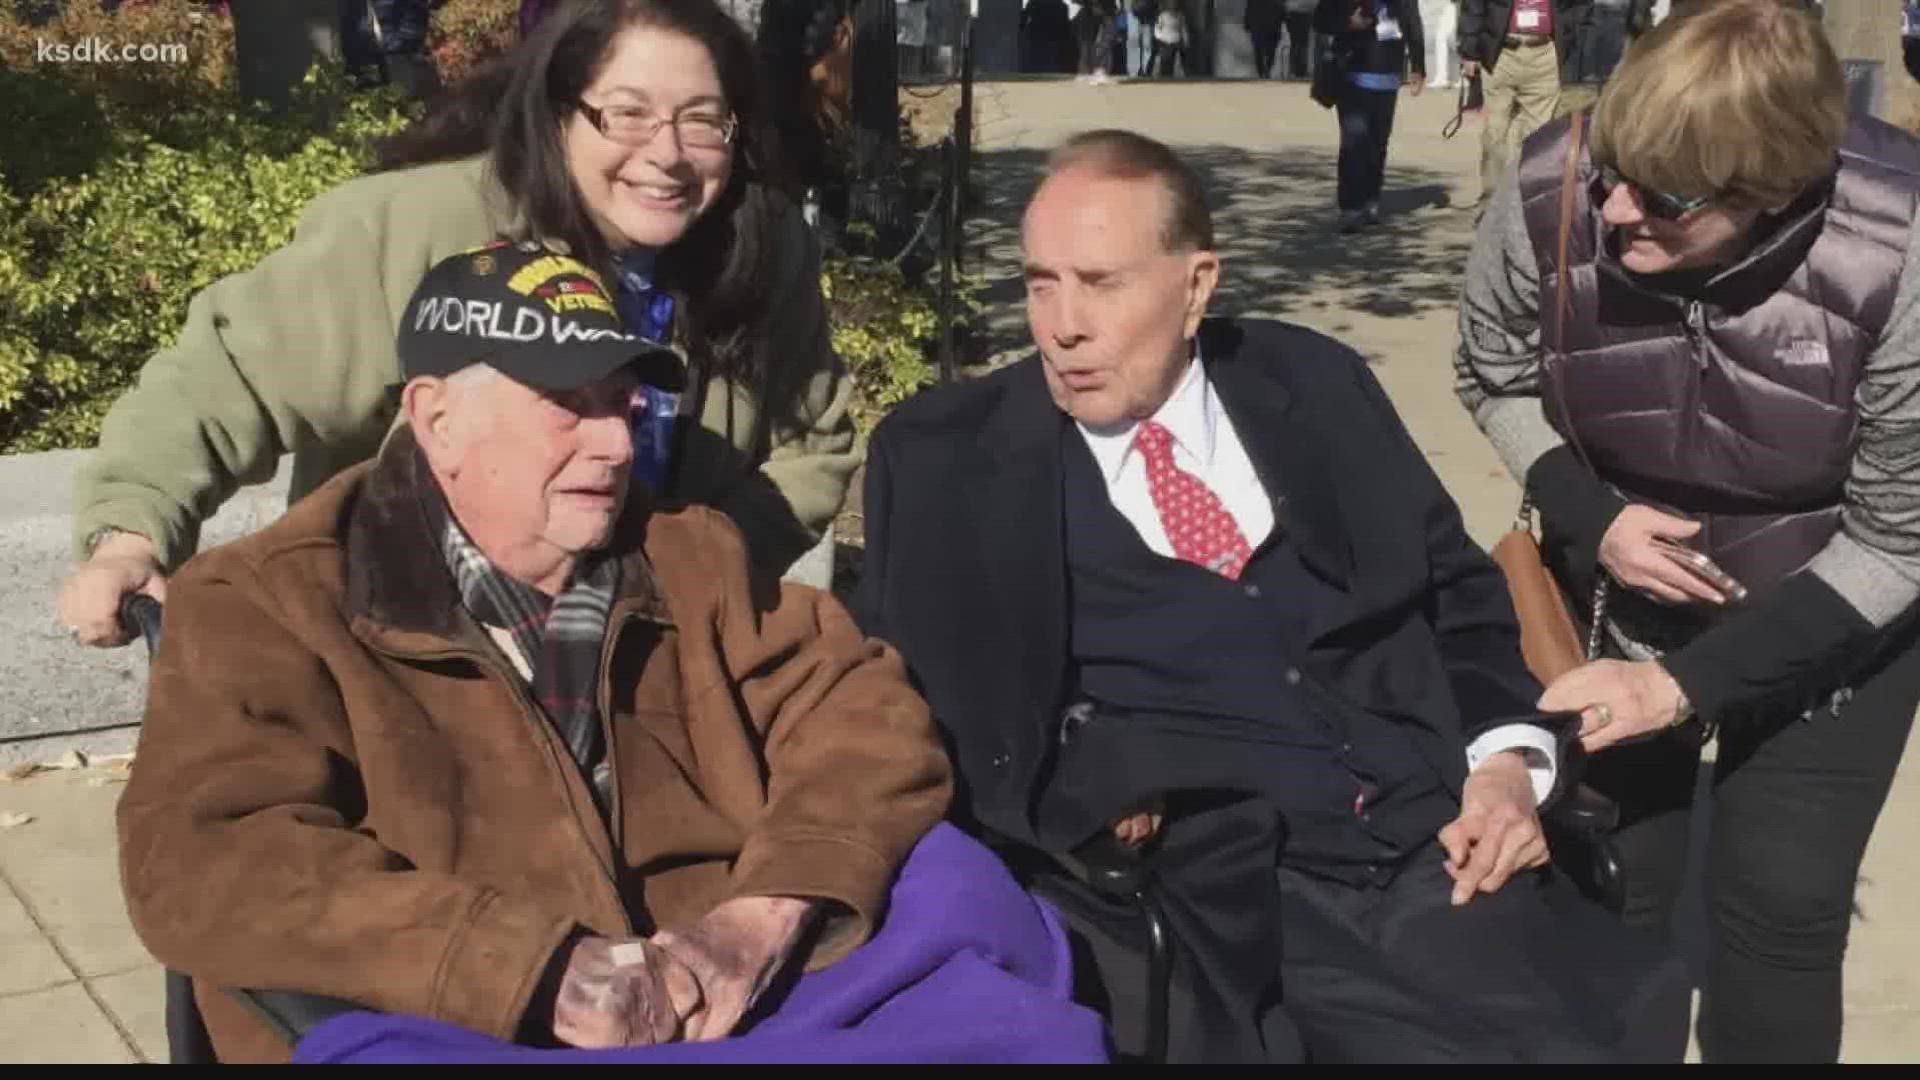 “It was very warm, and friendly, and welcoming,” said Katz. “Bob Dole was just sitting there shaking hands."